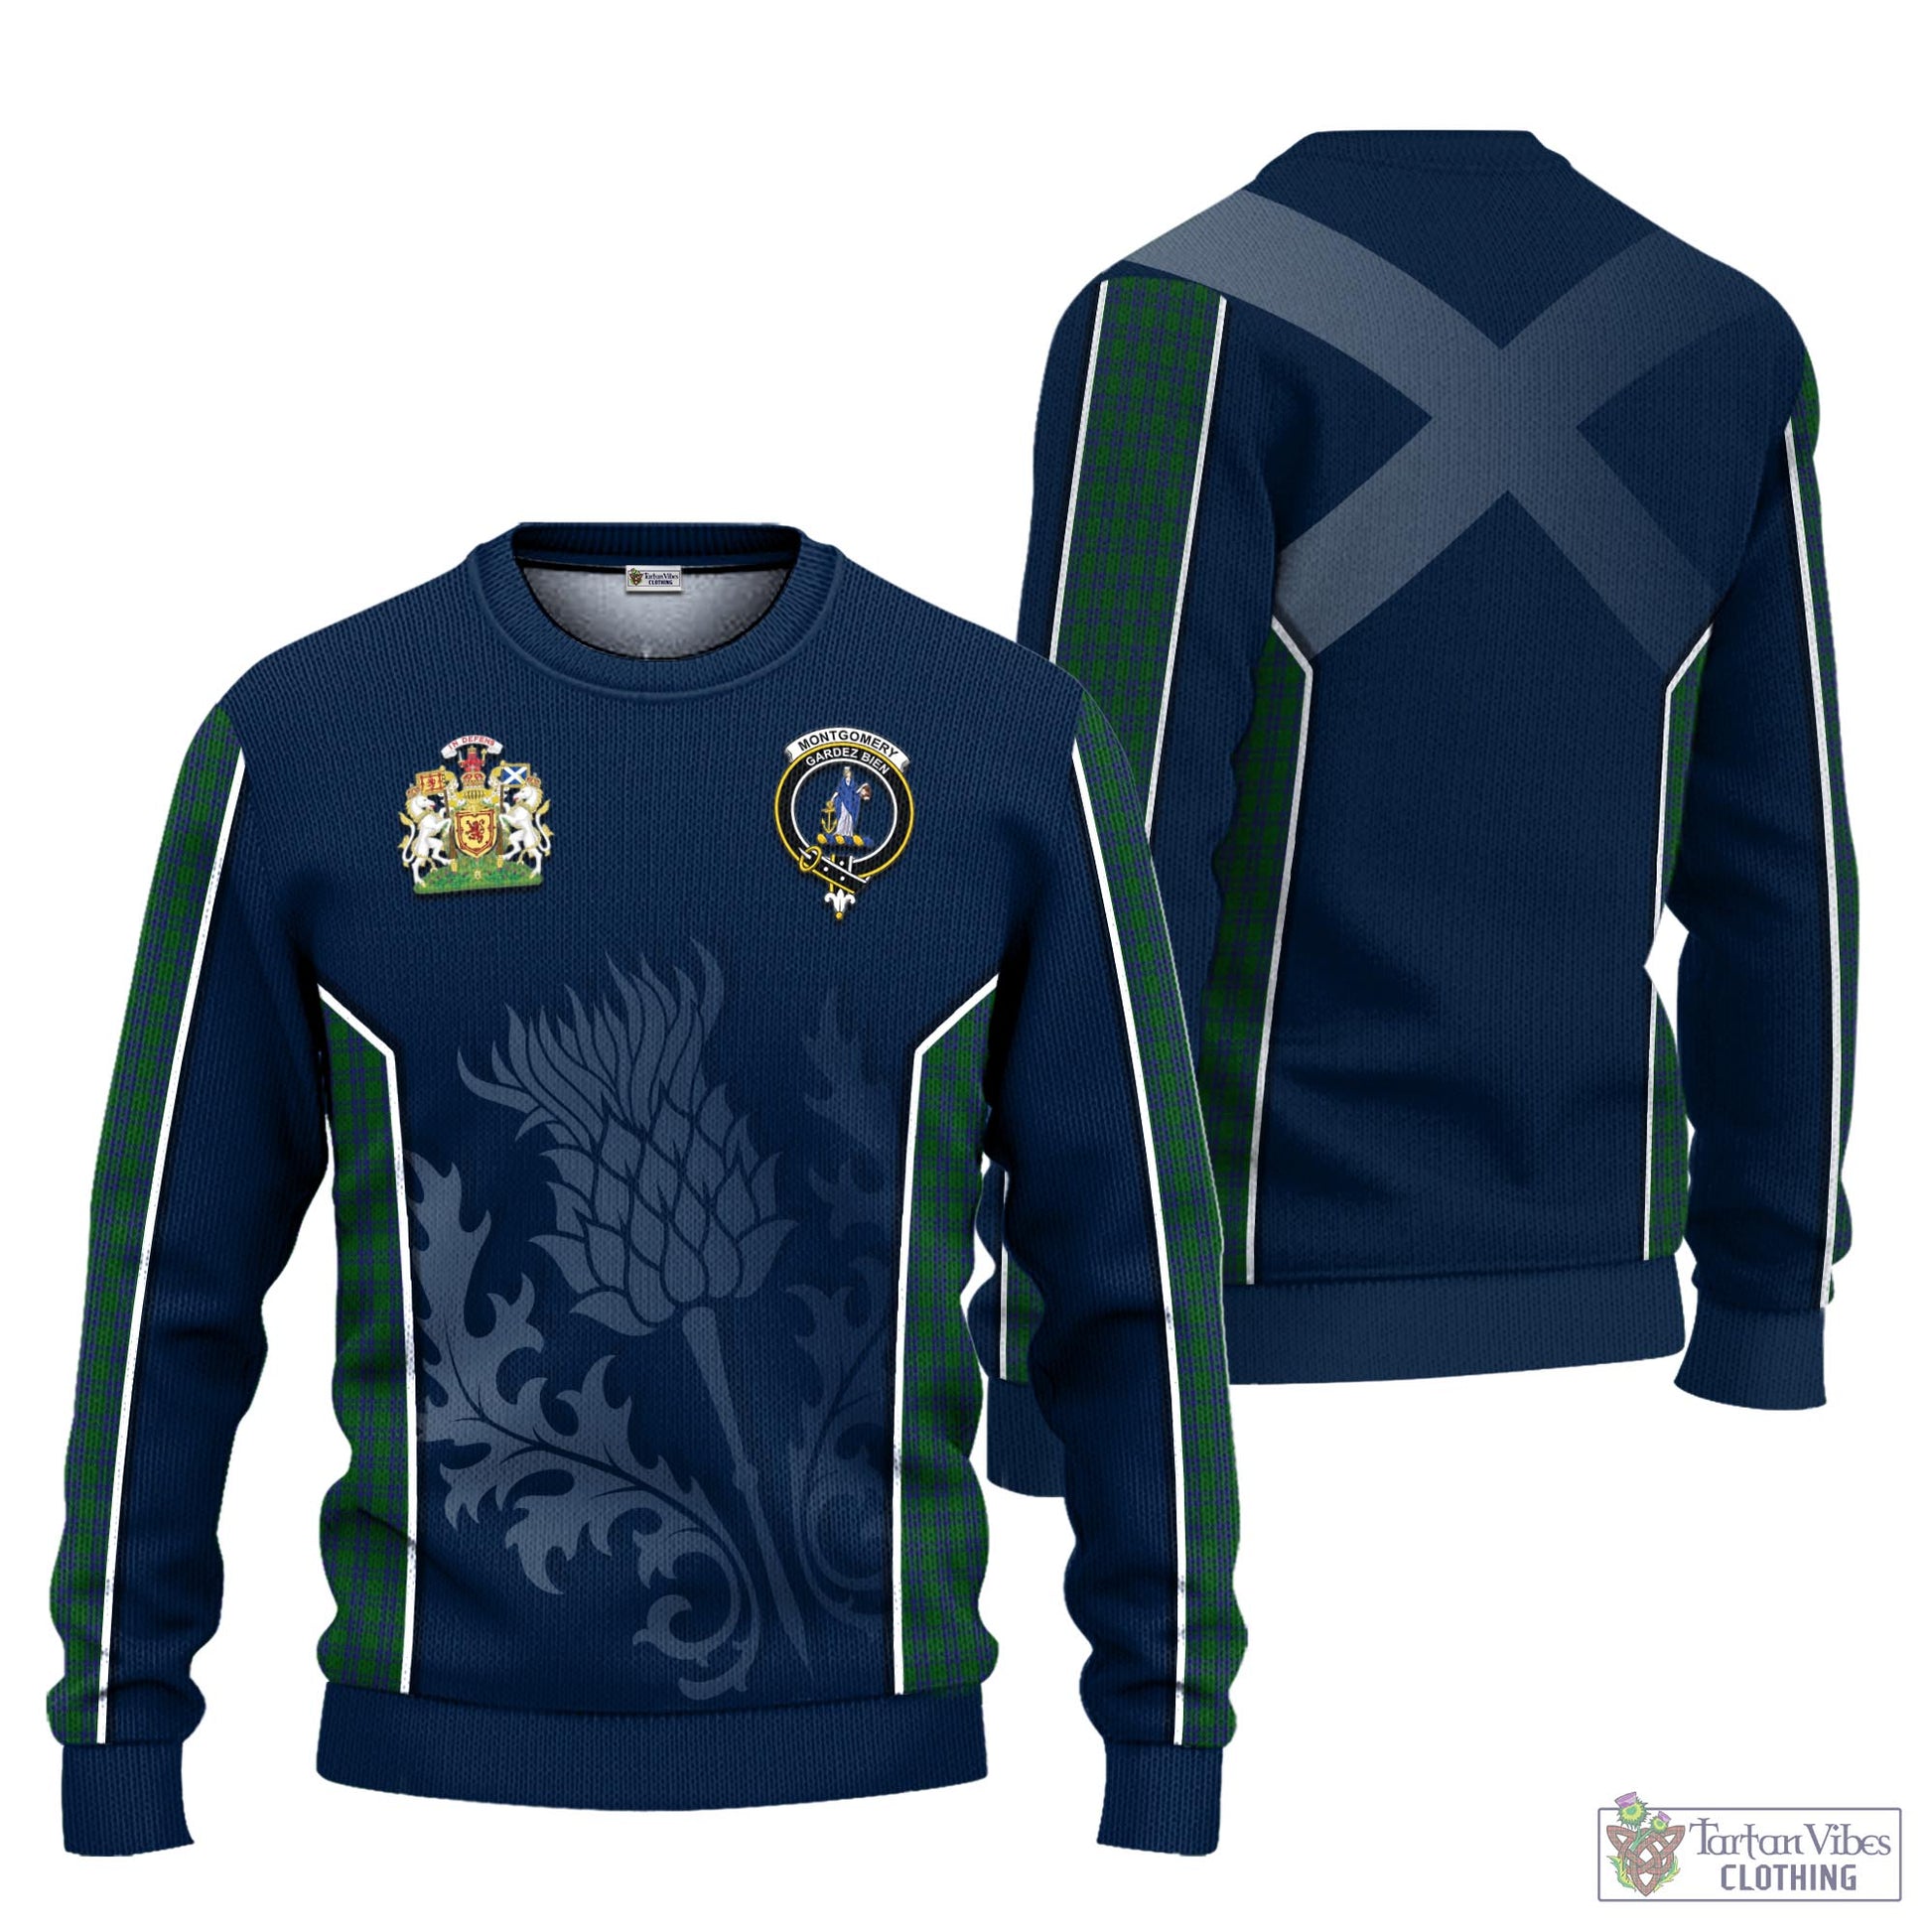 Tartan Vibes Clothing Montgomery Tartan Knitted Sweatshirt with Family Crest and Scottish Thistle Vibes Sport Style